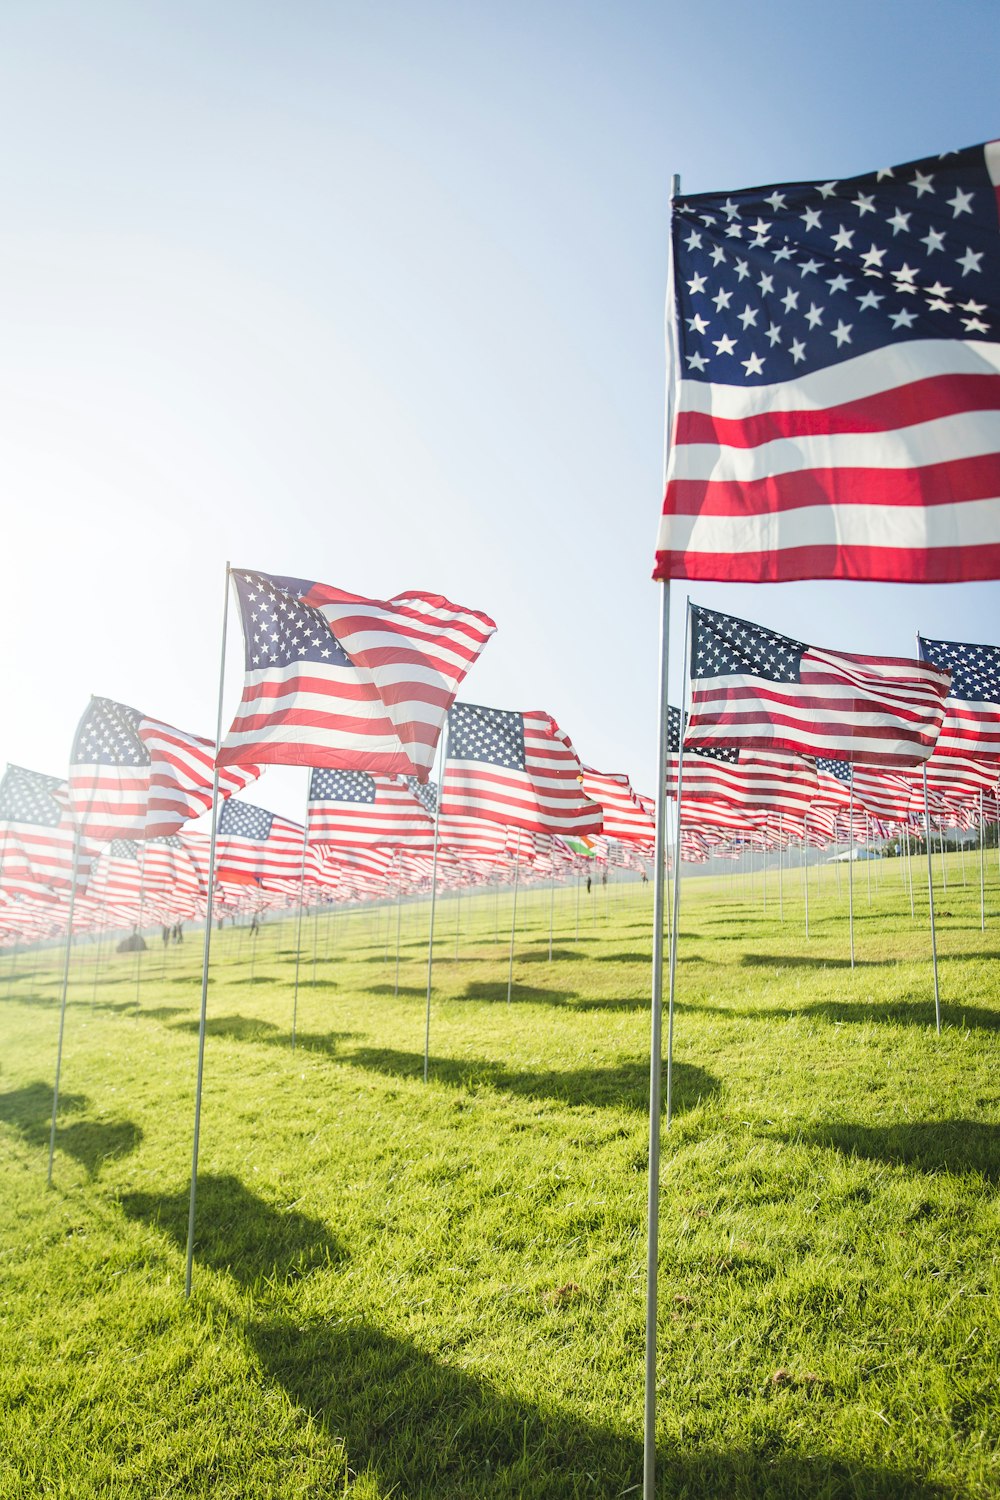 flag of America lot on grass field